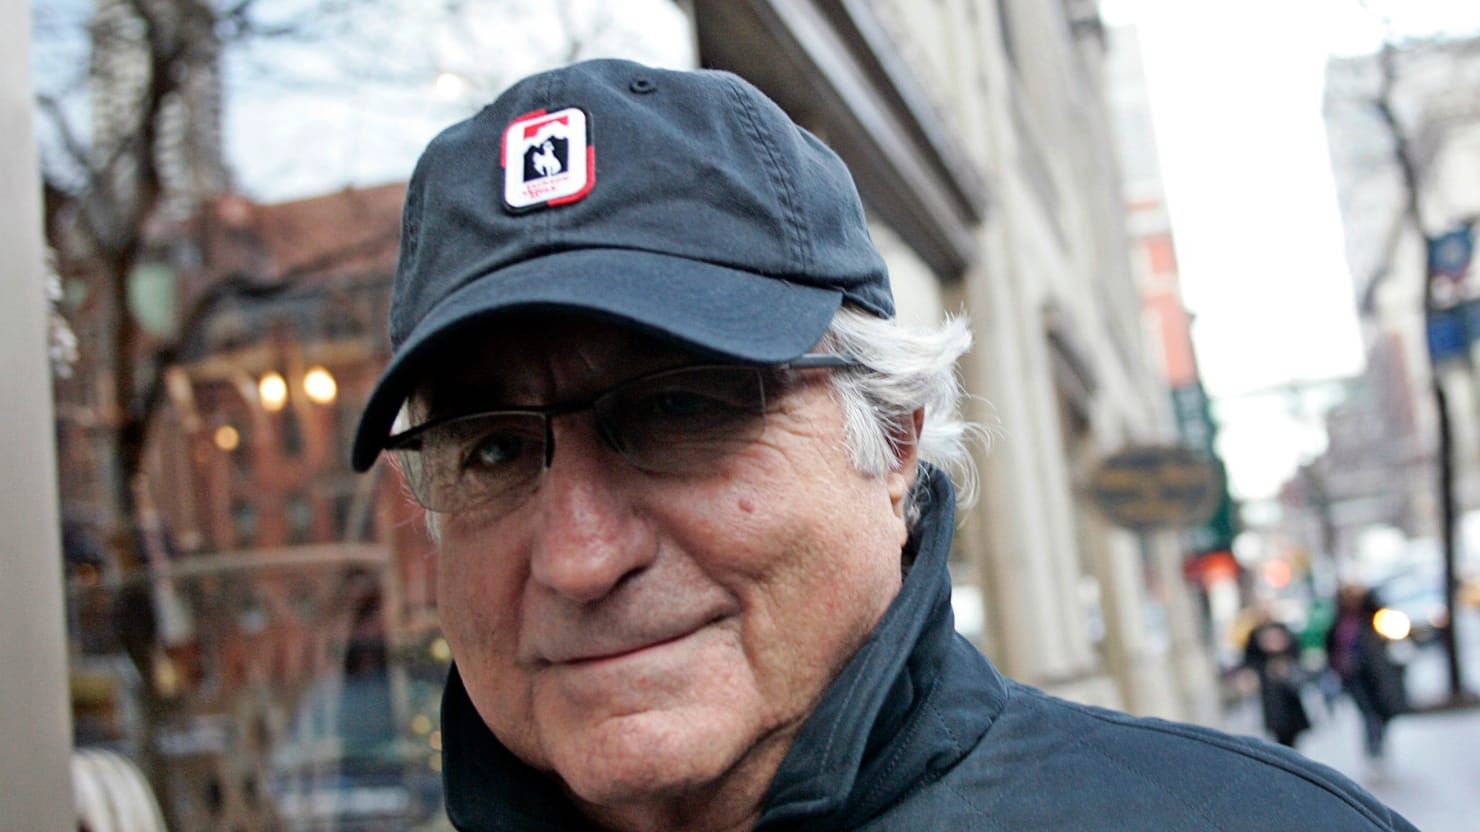 Madoff Disputes ABC Movie About Him - The Daily Beast1480 x 832